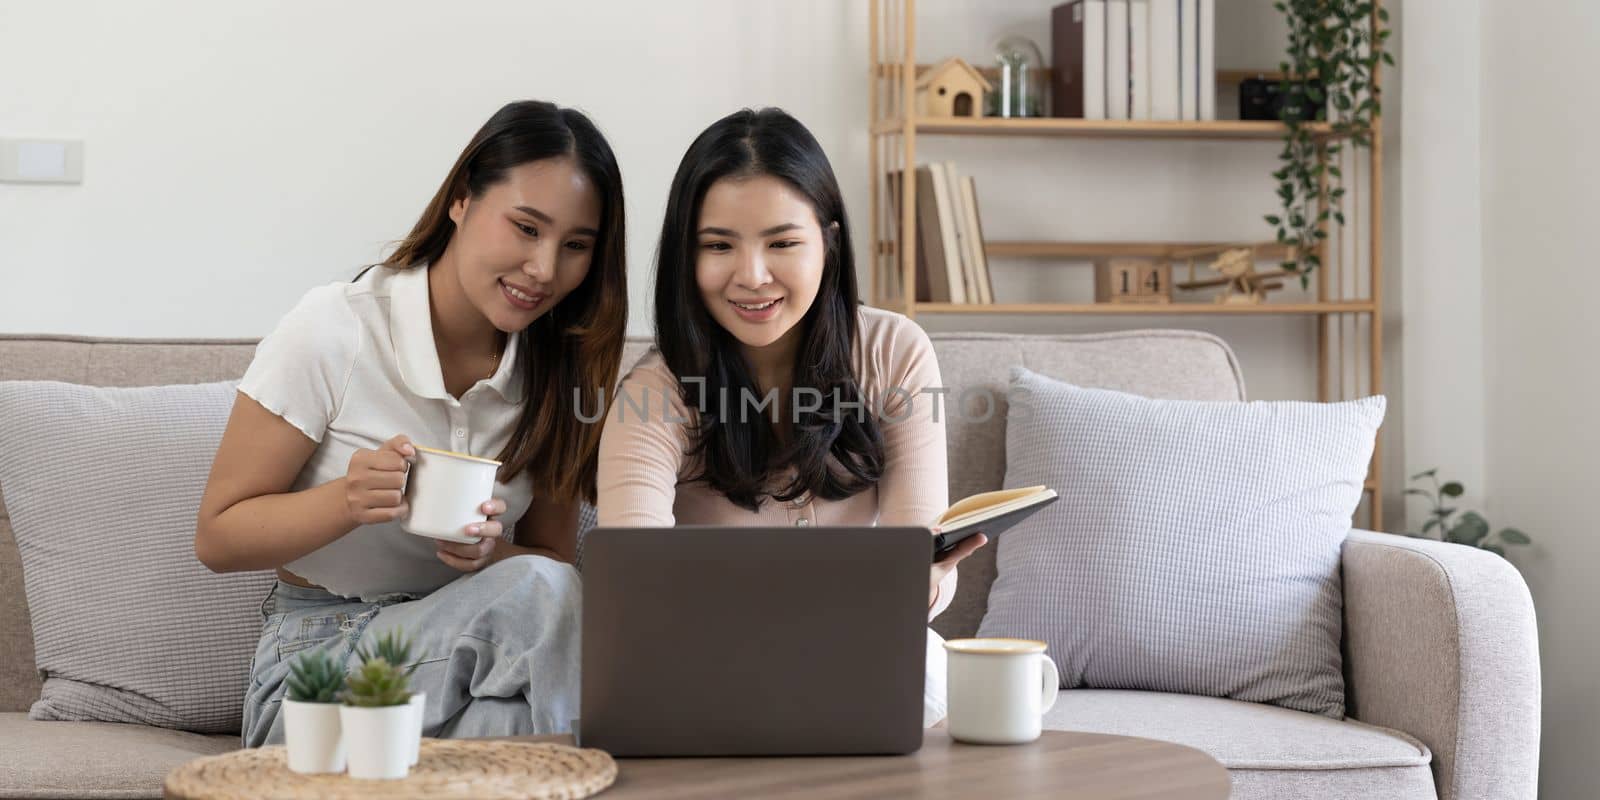 Happy young asian women LGBT lesbian happy couple sitting on sofa using laptop a computer in living room at home. LGBT lesbian couple together by nateemee